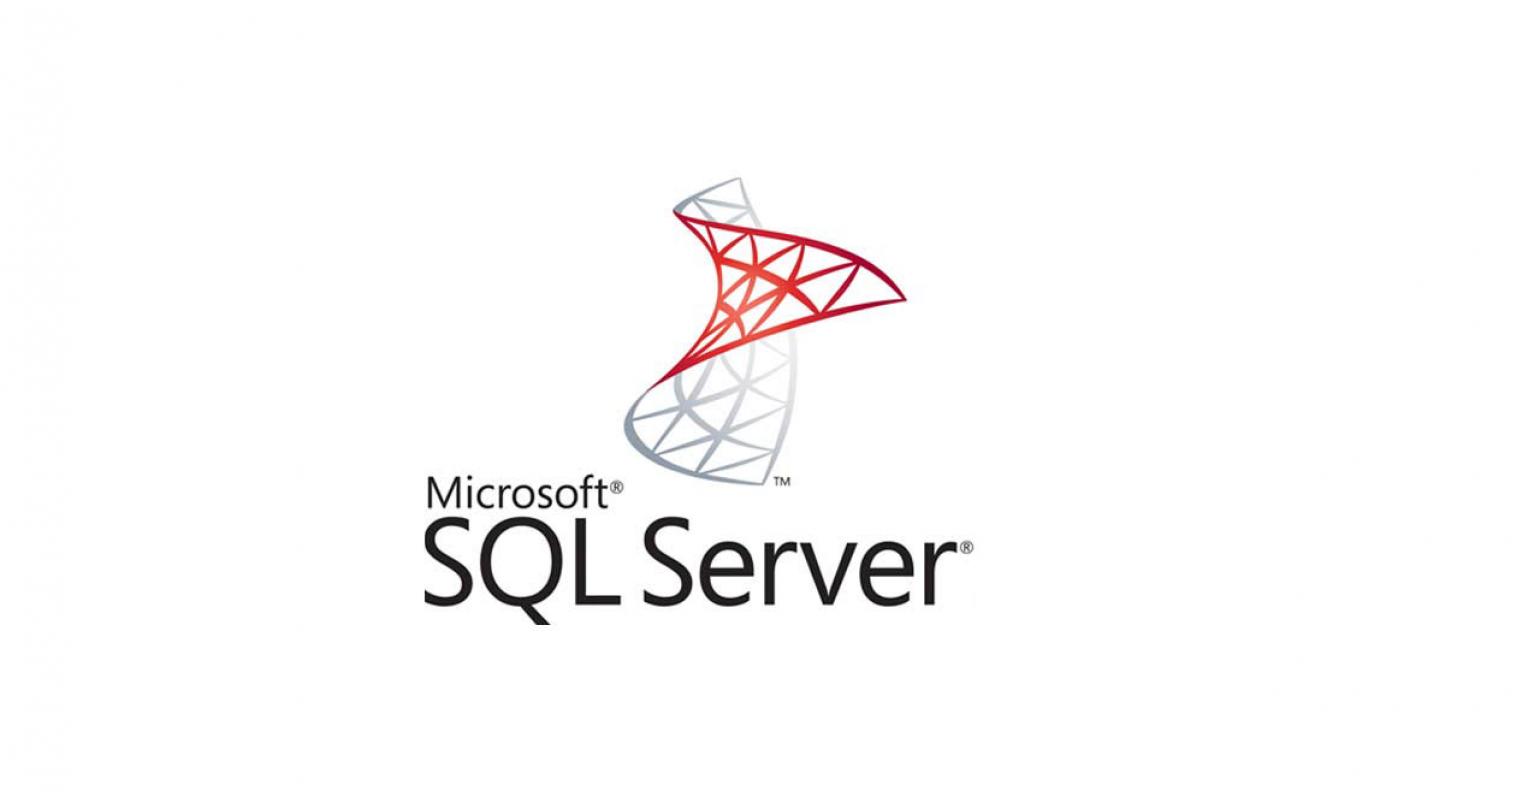 The Essential Guide To SQL Server 2014 Series: The Analysis Migrate Report (AMR) Tool. ITPro Today: IT News, How Tos, Trends, Case Studies, Career Tips, More